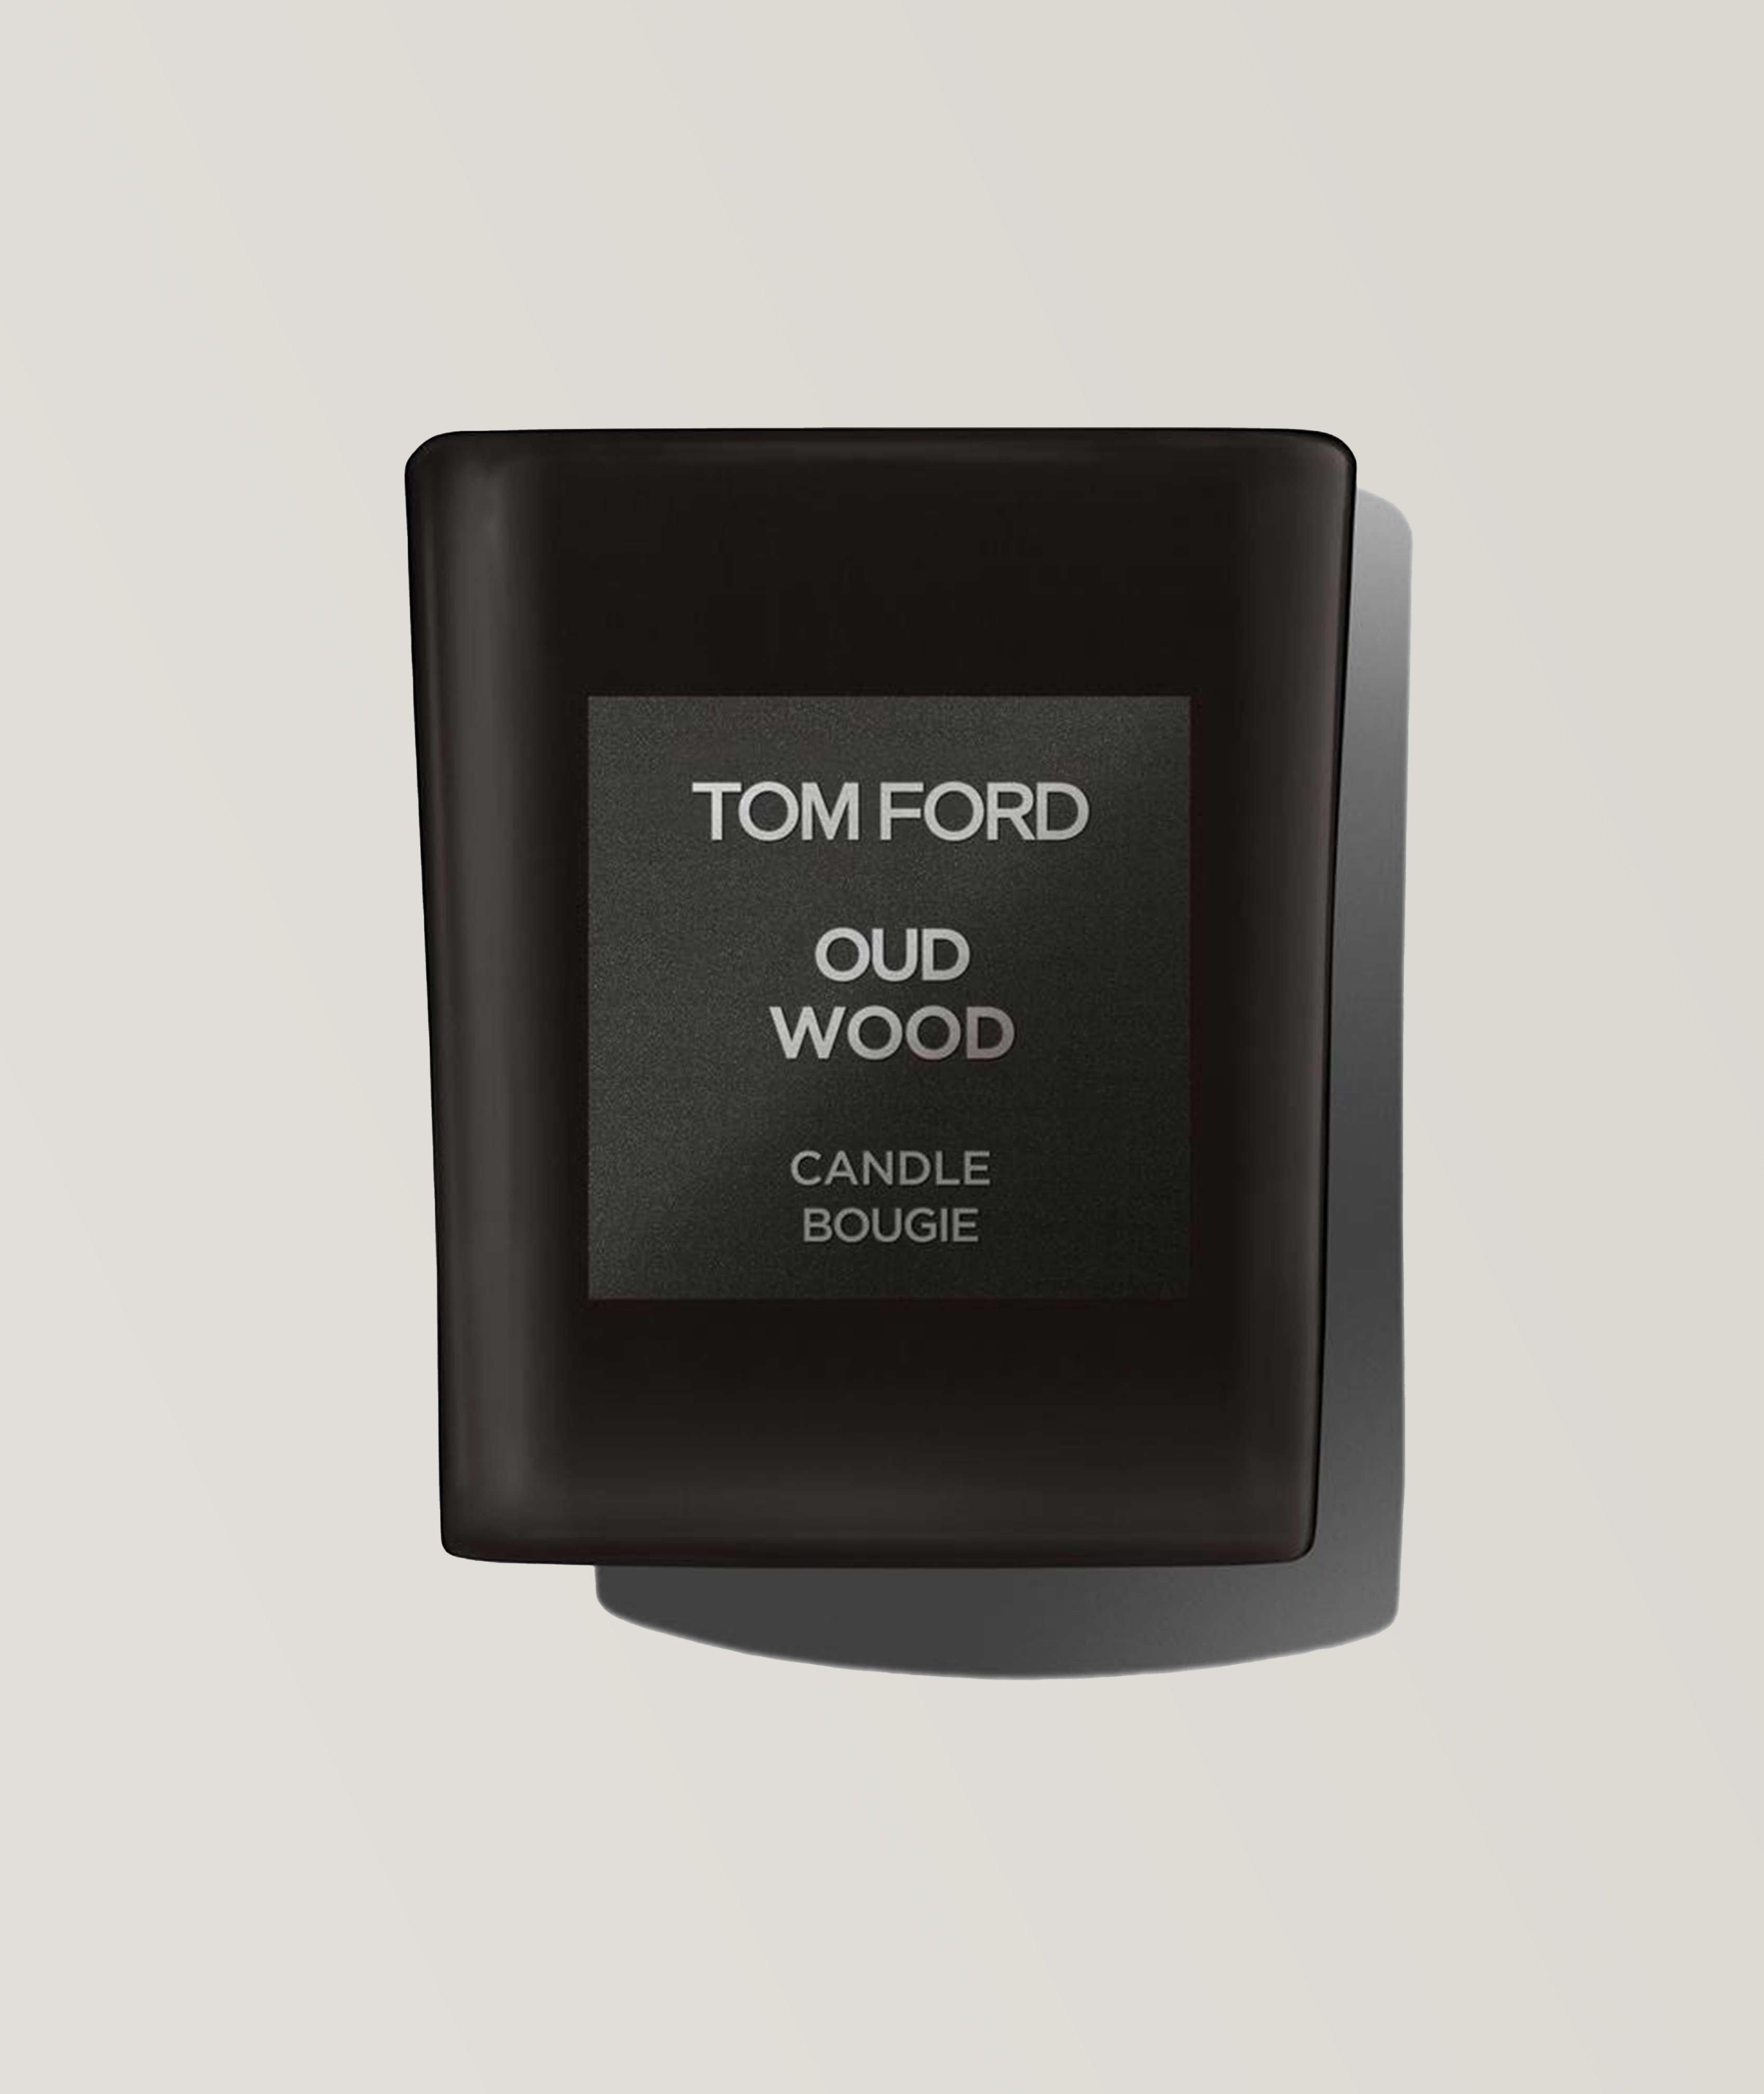 TOM FORD Oud Wood Candle 